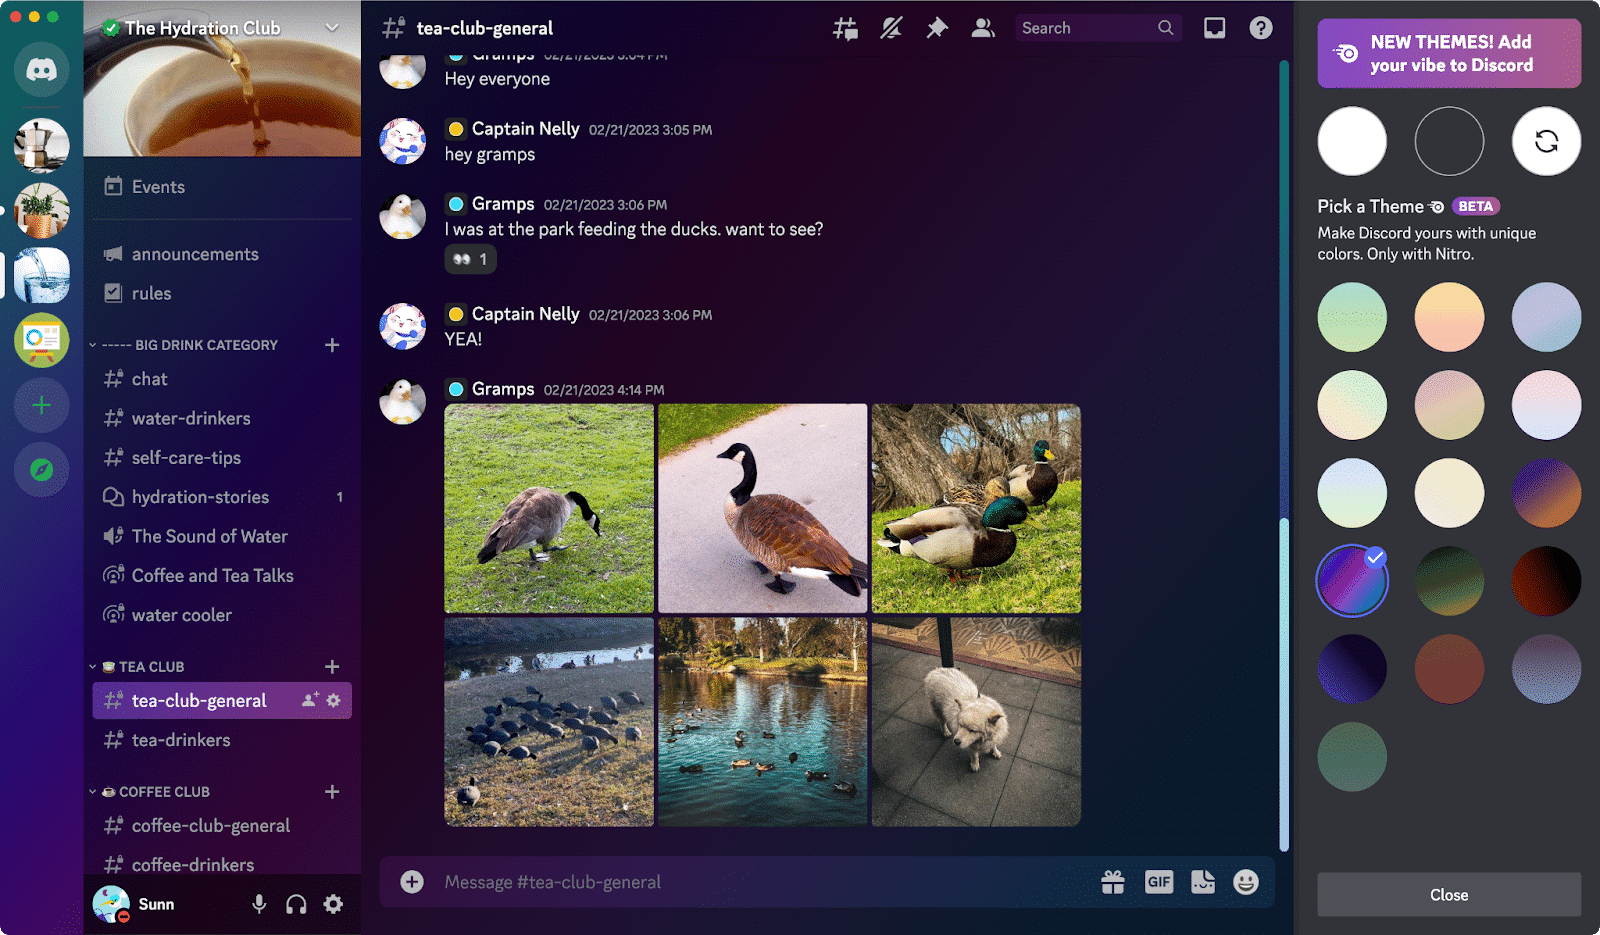 Discord Themes Now Lets You Change The Look Of The App, But Only For Nitro Subscribers 26